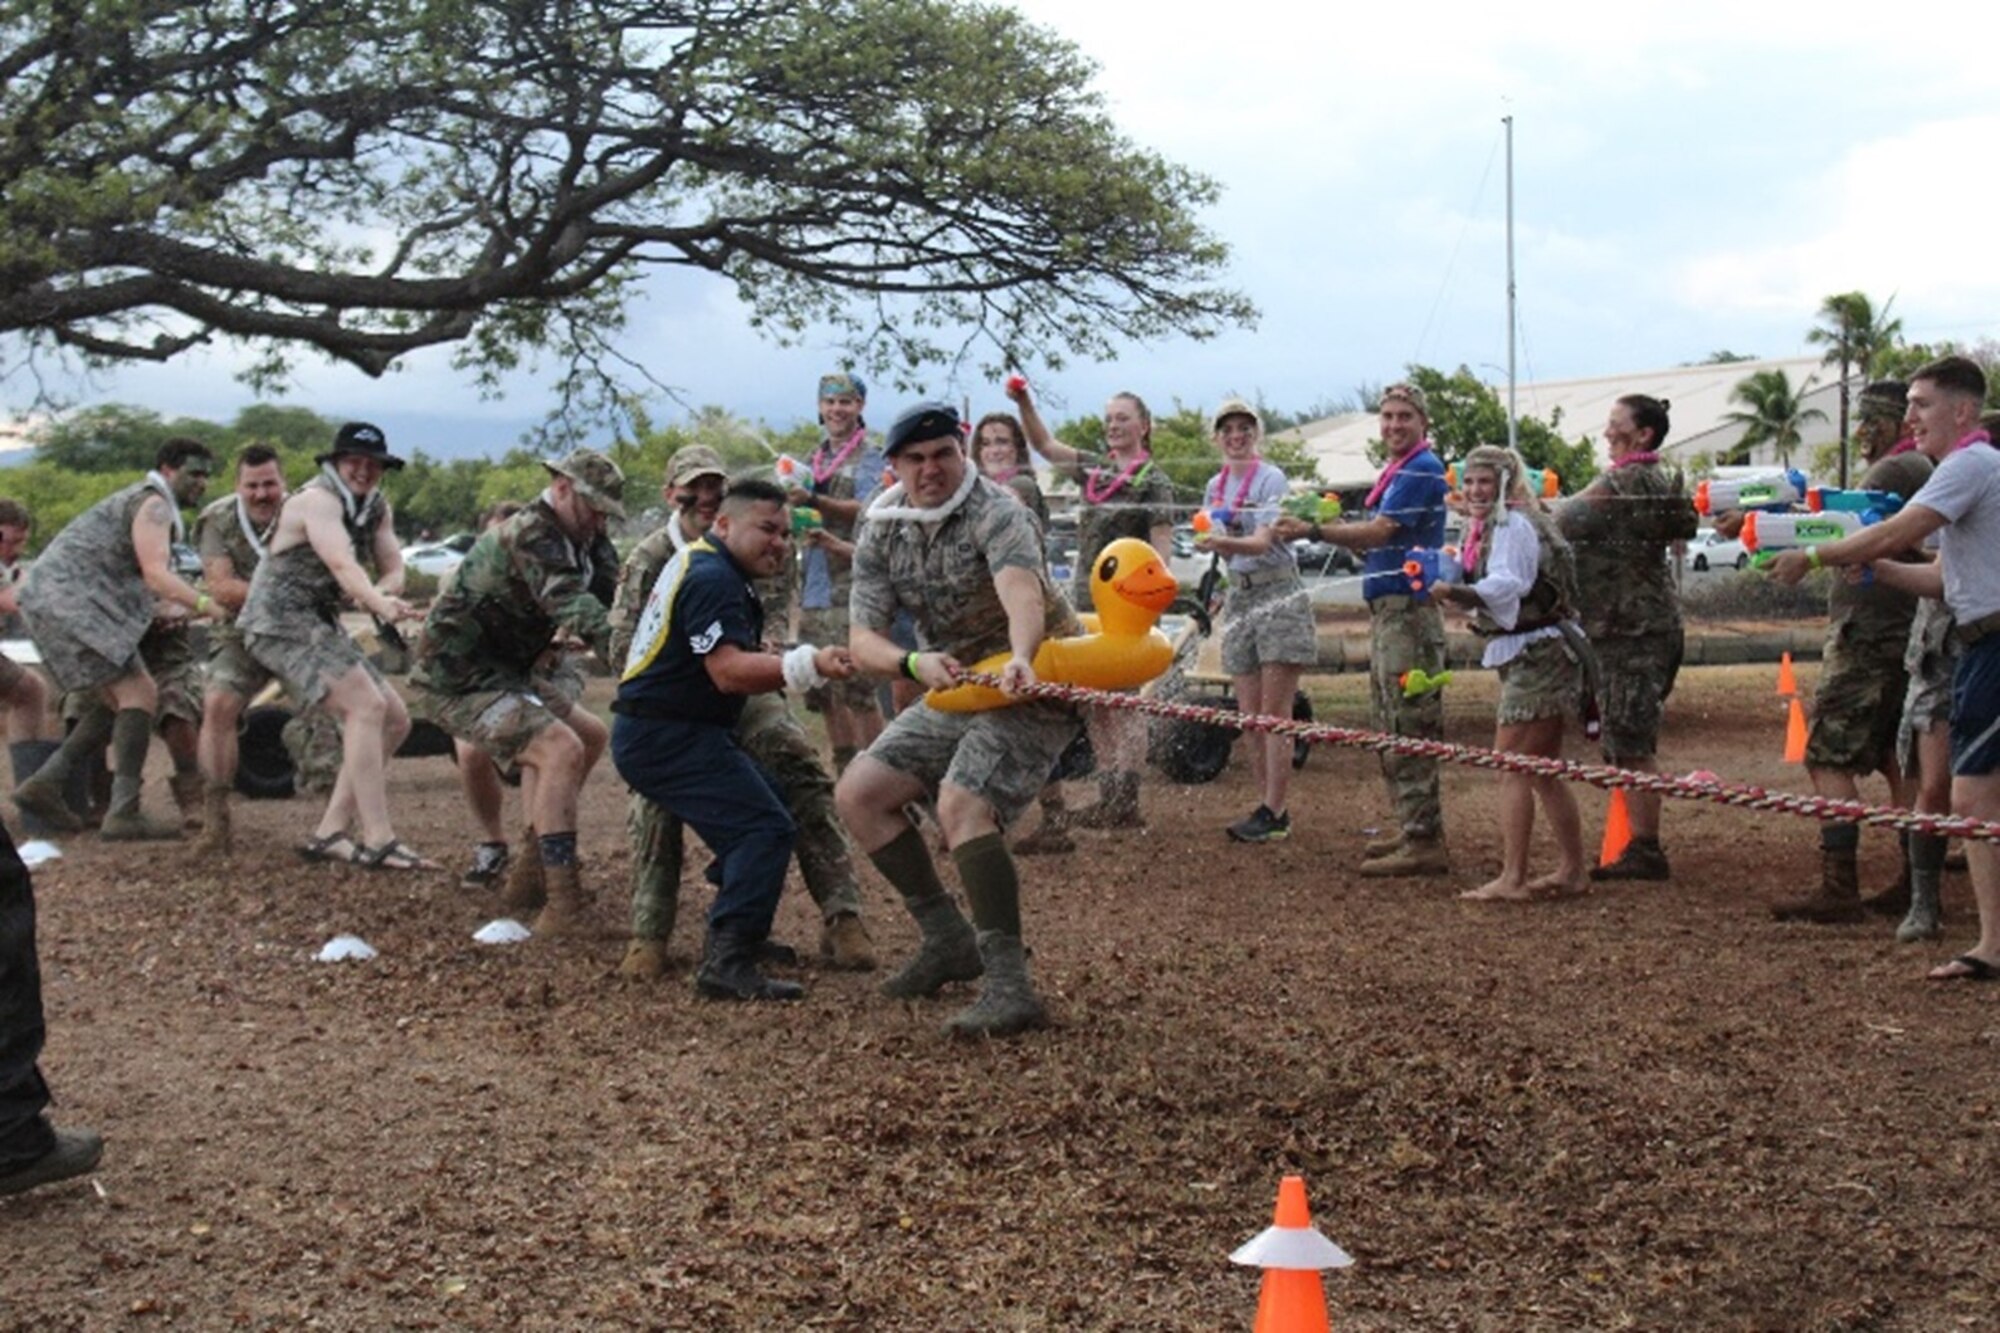 Members of the 17th Operational Weather Squadron and Joint Typhoon Warning Center engage in tug-o-war during a Combat Dining-In on Sept. 16 at Hickam Air Force Base, Hawaii.